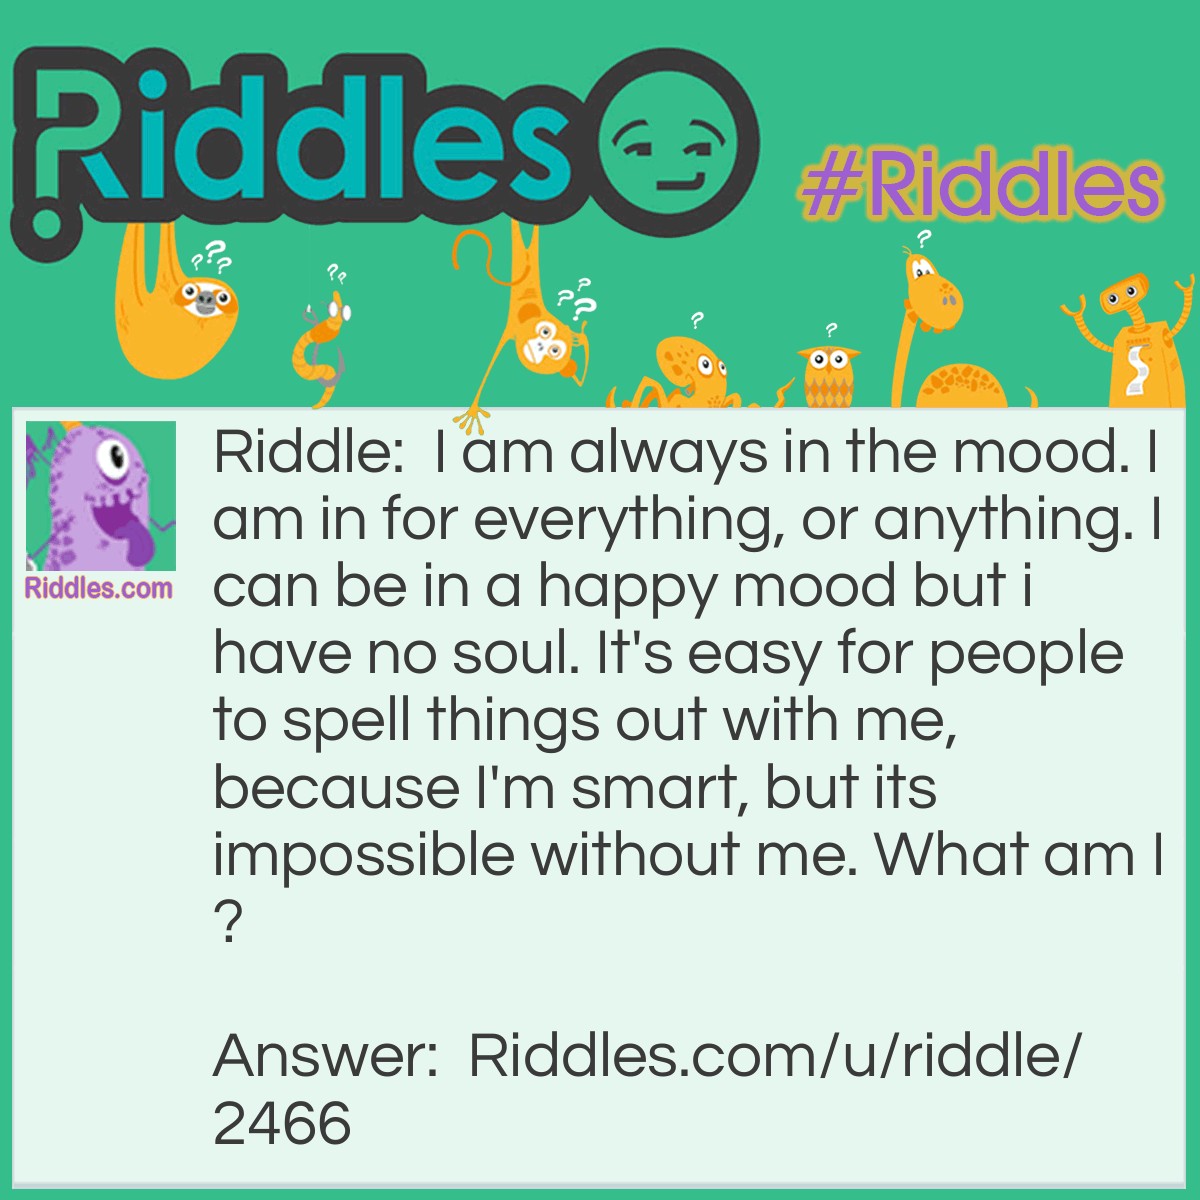 Riddle: I am always in the mood. I am in for everything, or anything. I can be in a happy mood but I have no soul. It's <a href="/easy-riddles">easy</a> for people to spell things out with me, because I'm smart, but it's impossible without me. What am I? Answer: I am letters.